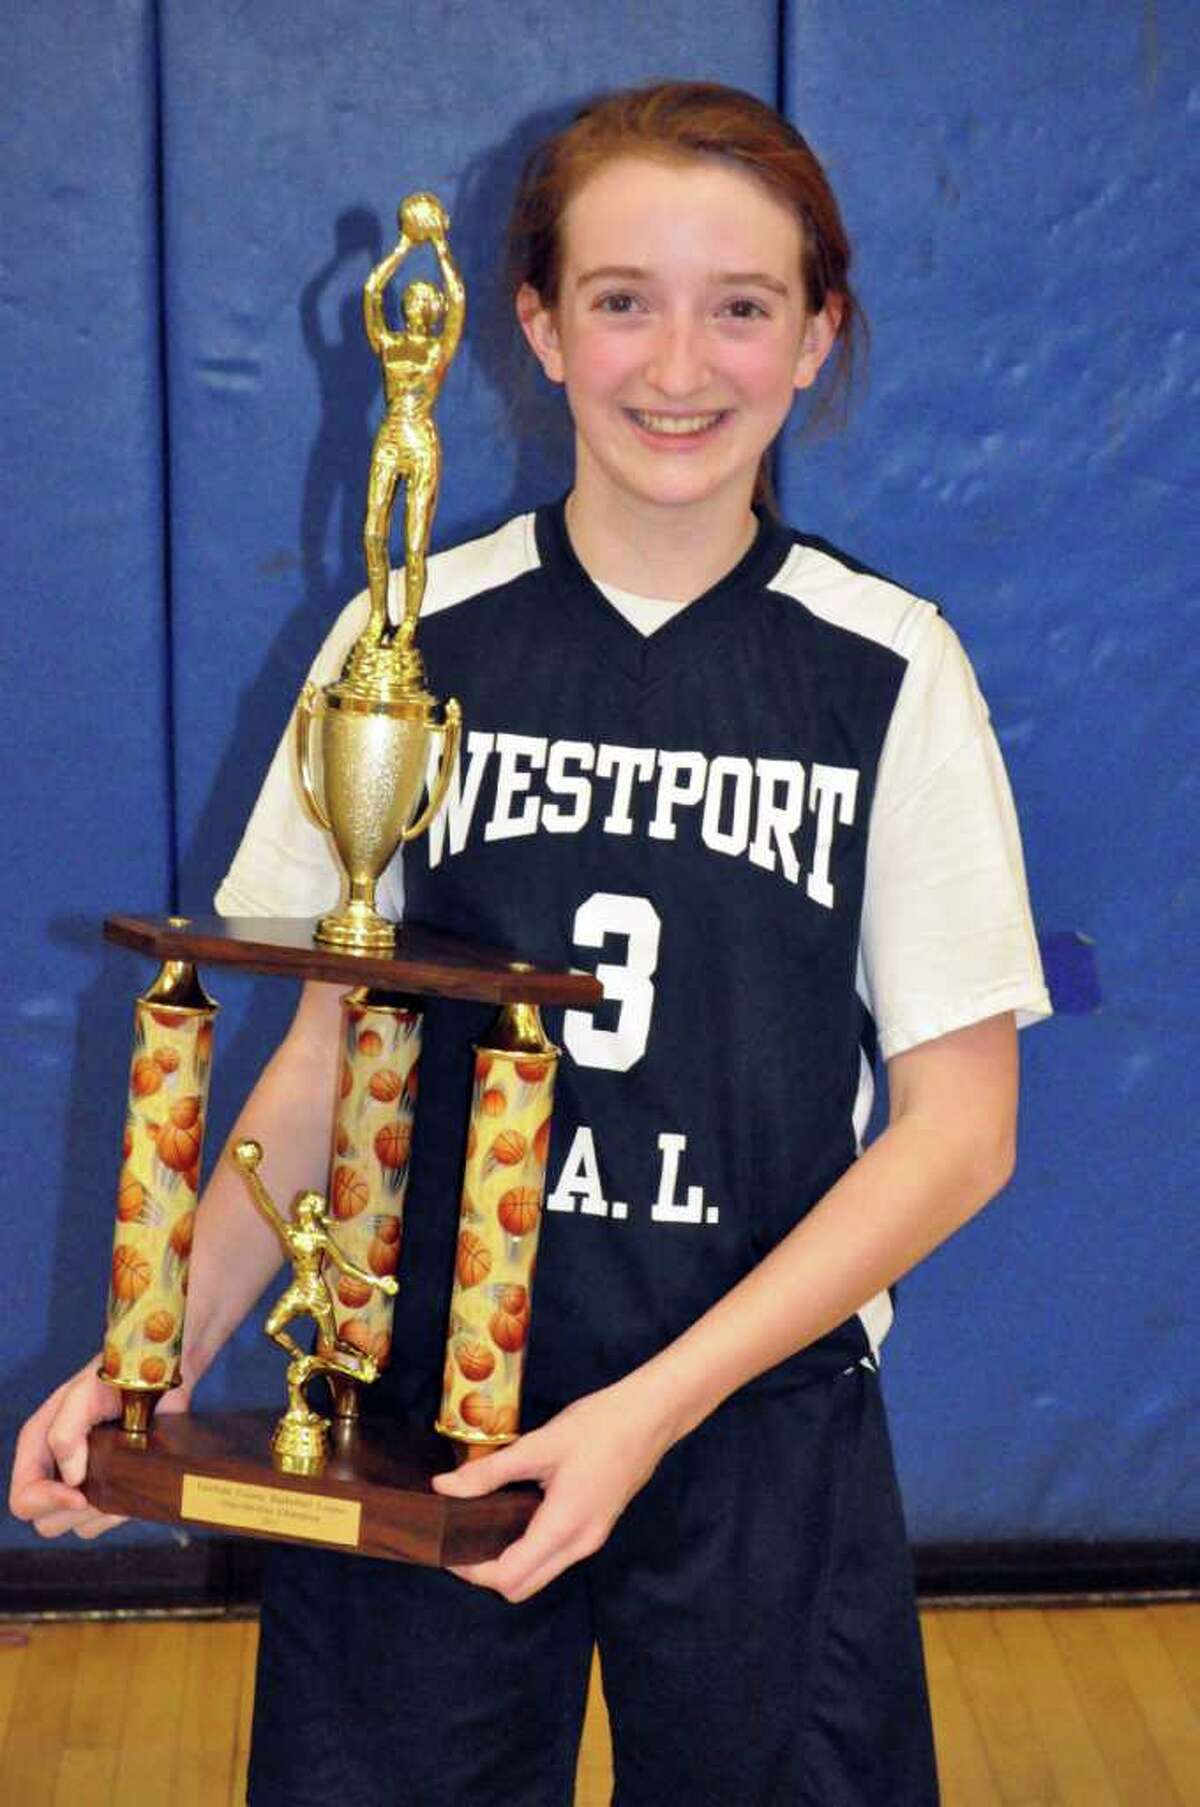 Westport PAL seventh grader Claire Meehan holds her basketball trophy after winning the Fairfield County Basketball League one-on-one championship.